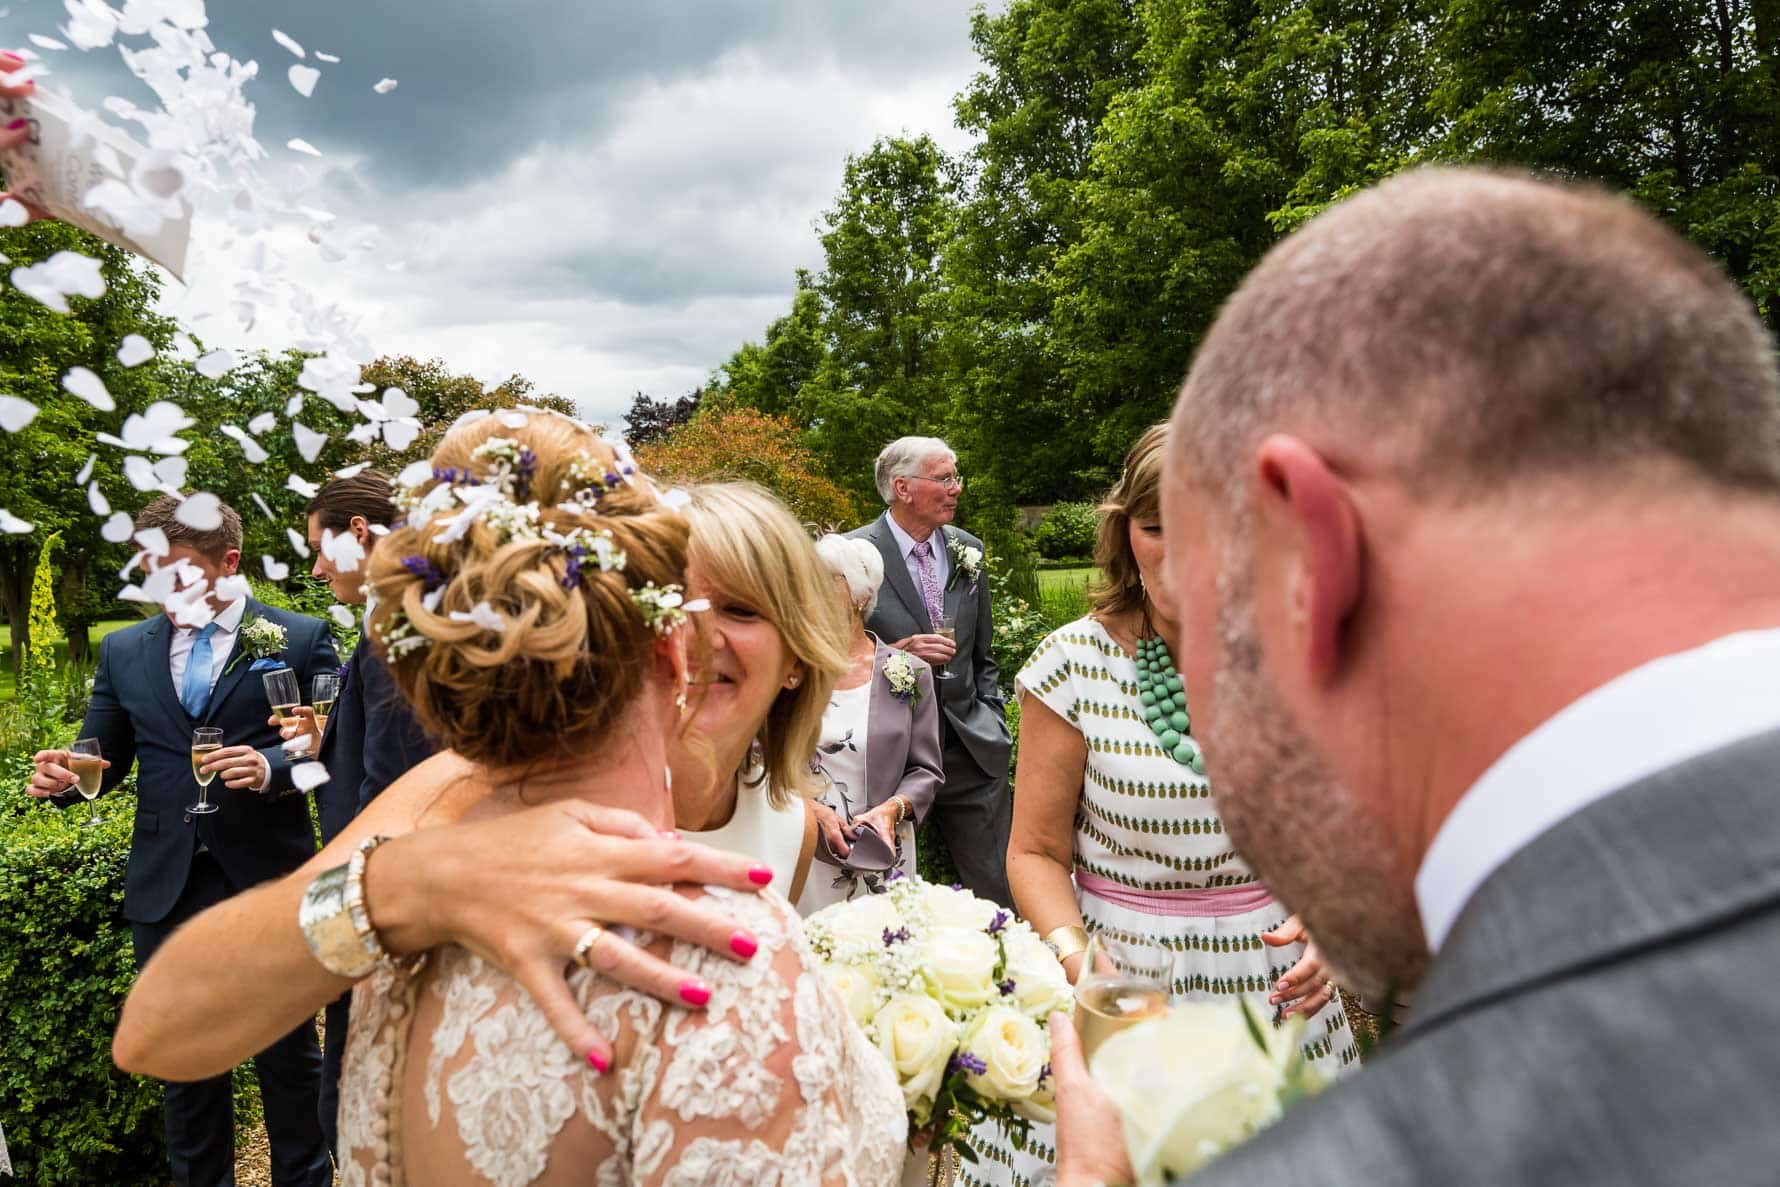 A hug and a kiss for the bride at Hanbury Manor wedding by Hertfordshire wedding photographer Graham Warrellow